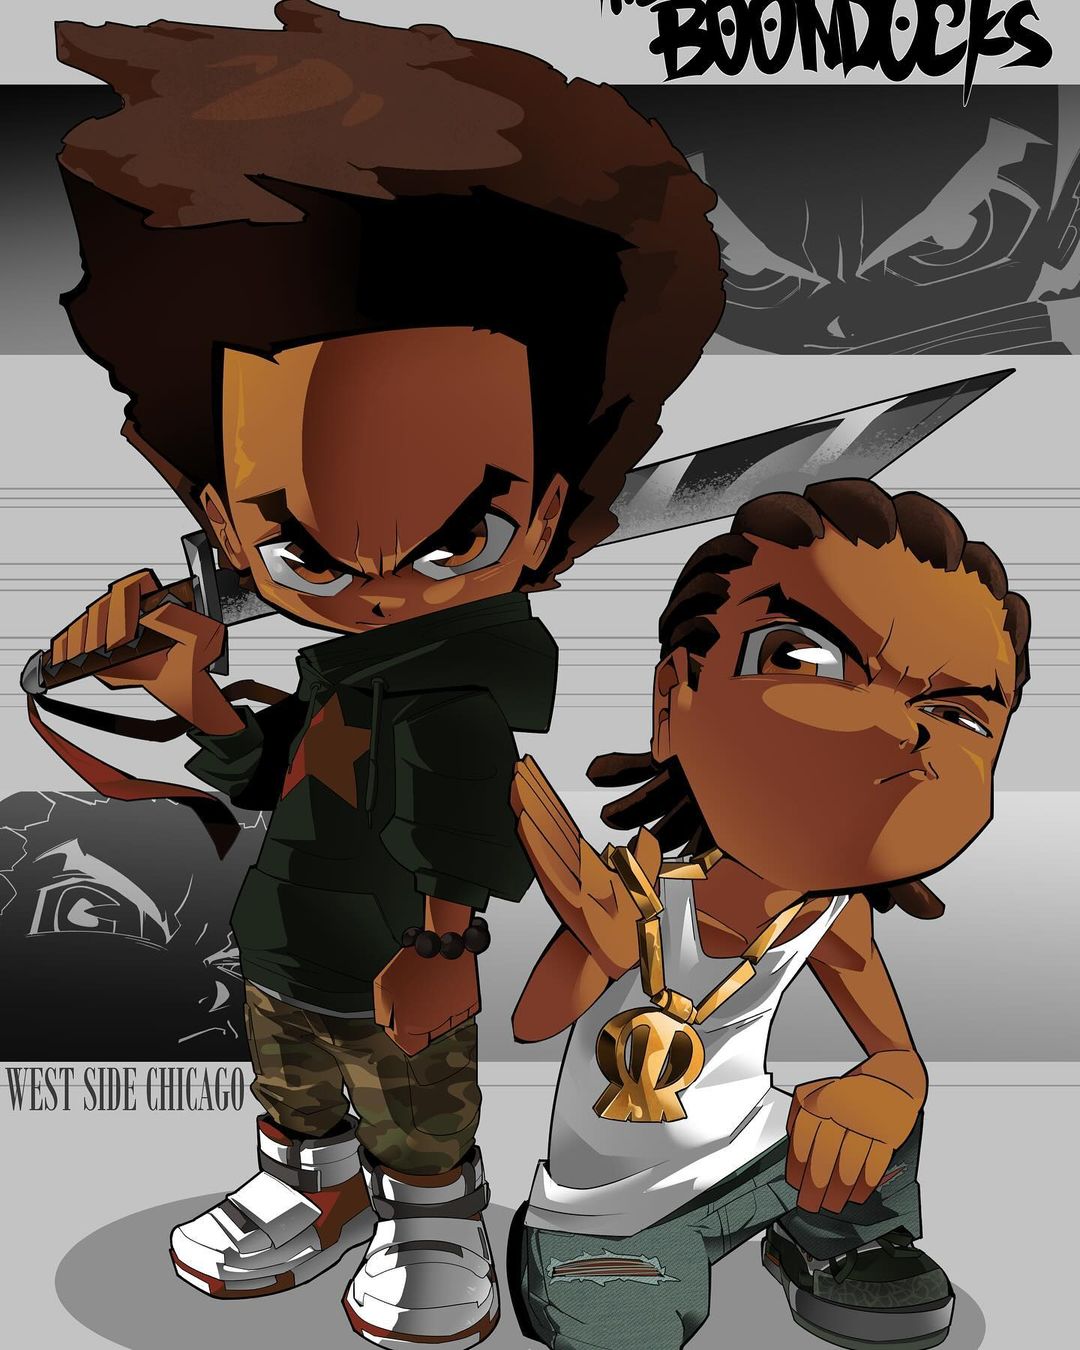 Posted by @_pkettles: THE BOONDOCKS,for the NG [Adult Swim] collab # ...